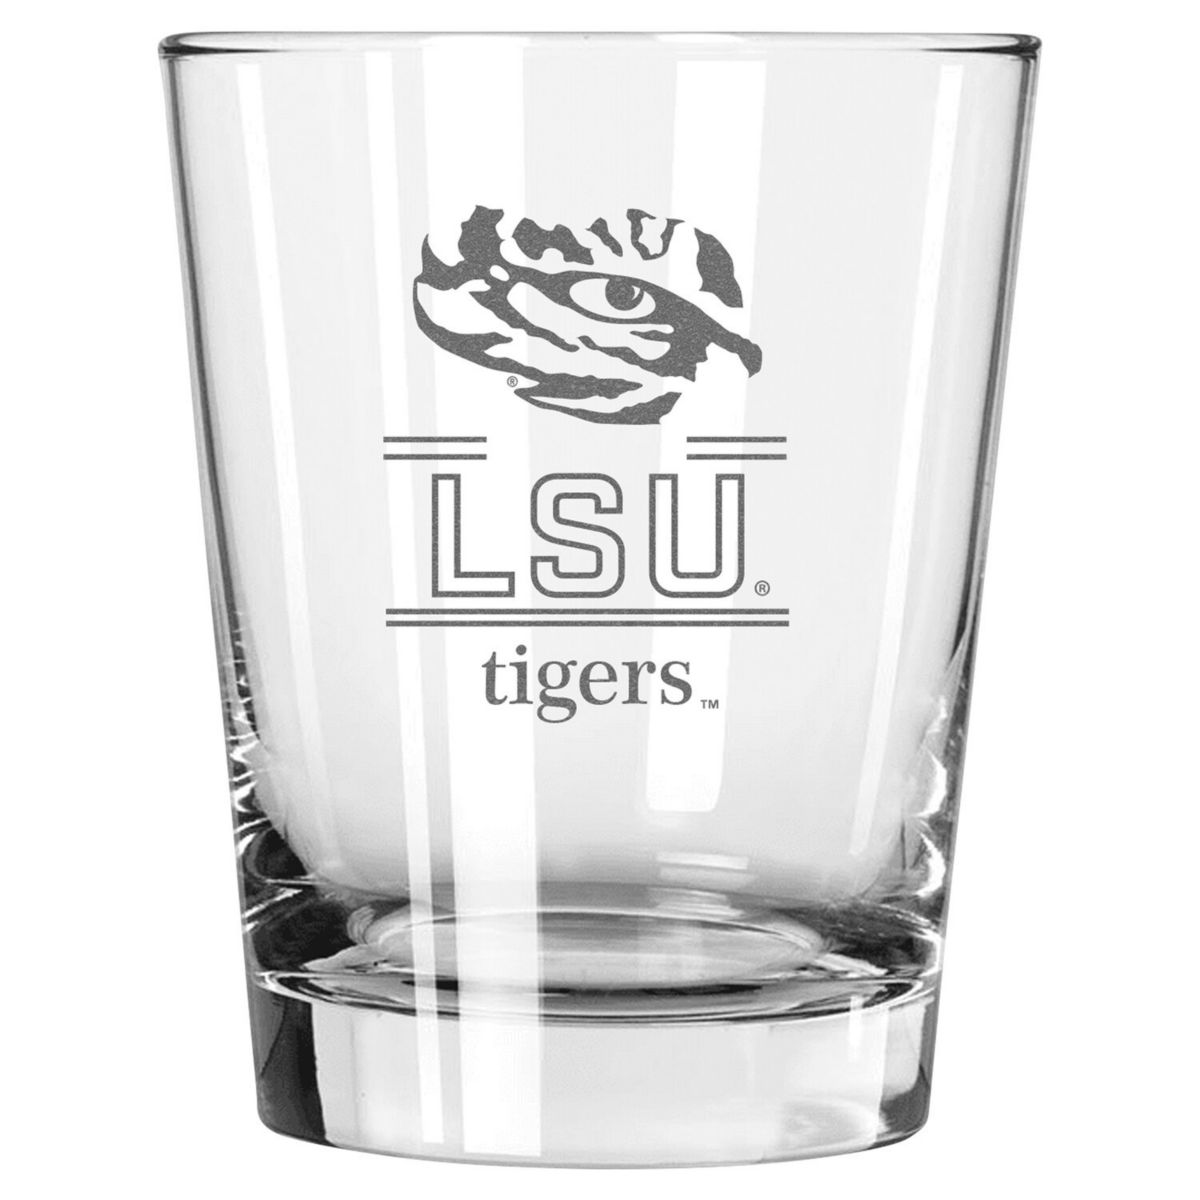 LSU Tigers 15oz. Double Old Fashioned Glass The Memory Company